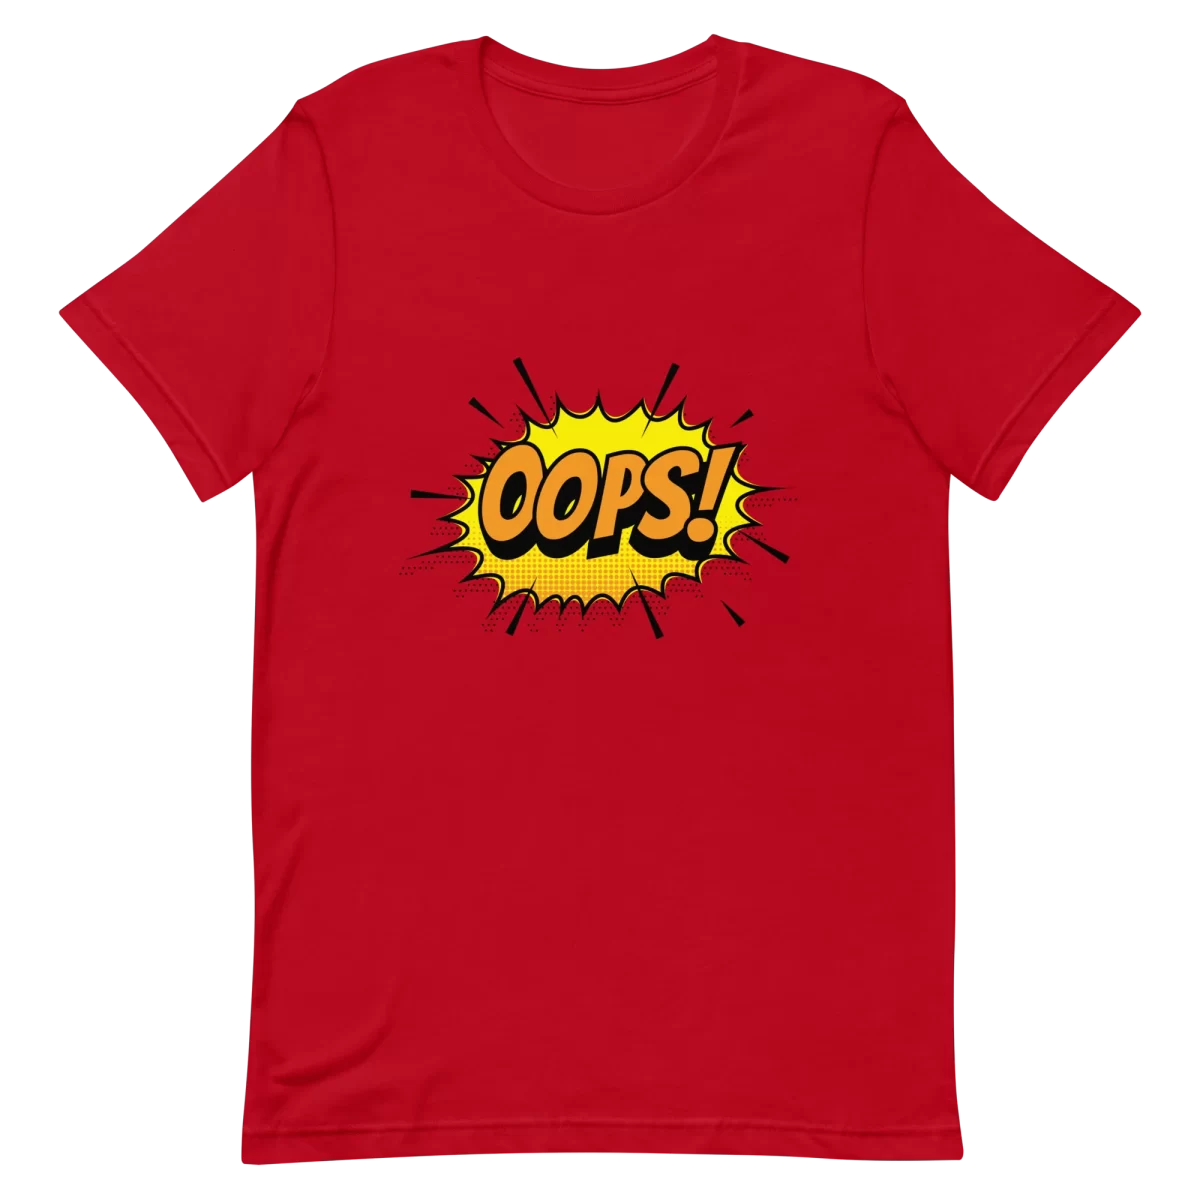 Unisex T-Shirt - OOPS! - Red